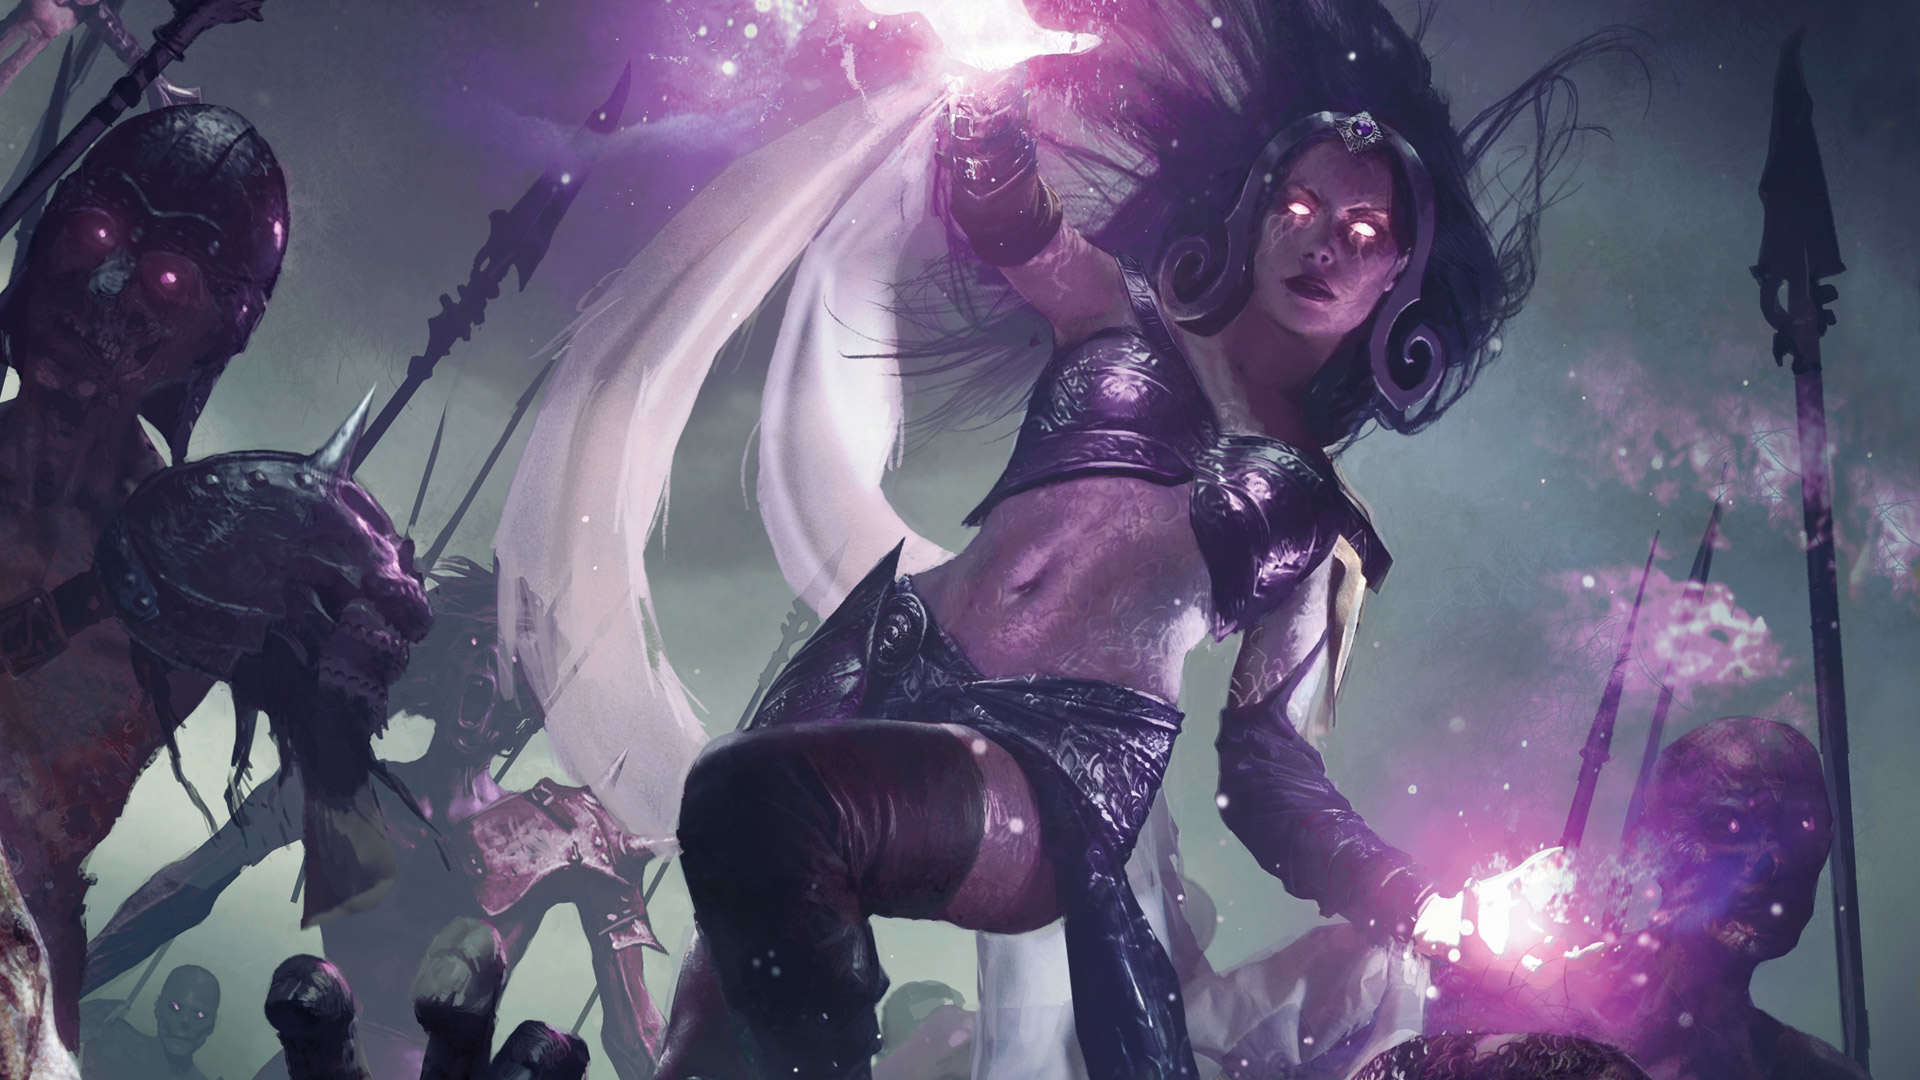 MTG Liliana Vess guide - Wizards of the Coast artwork showing Liliana Vess with skeleton undead servants